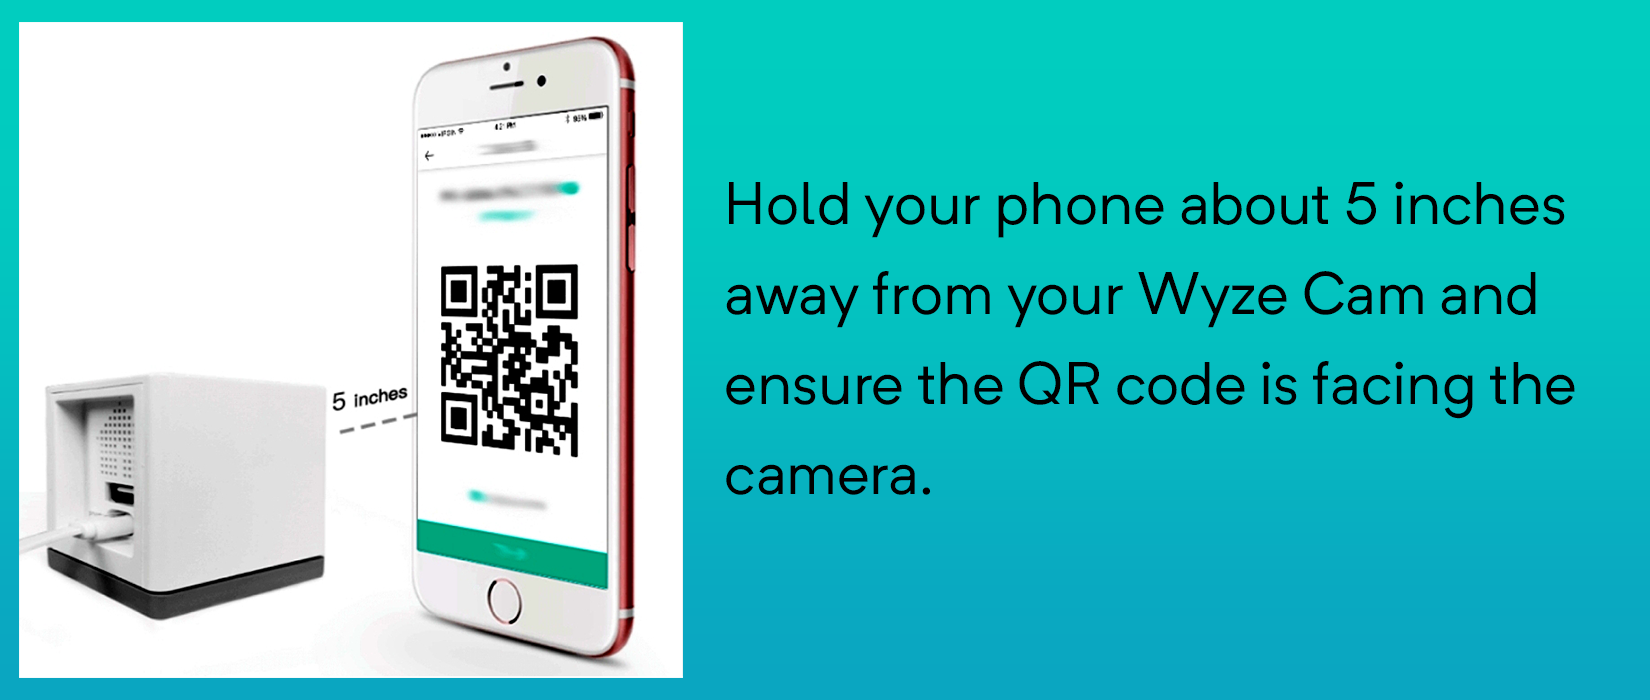 Scan QR codes on Camera from Google - Camera from Google Help